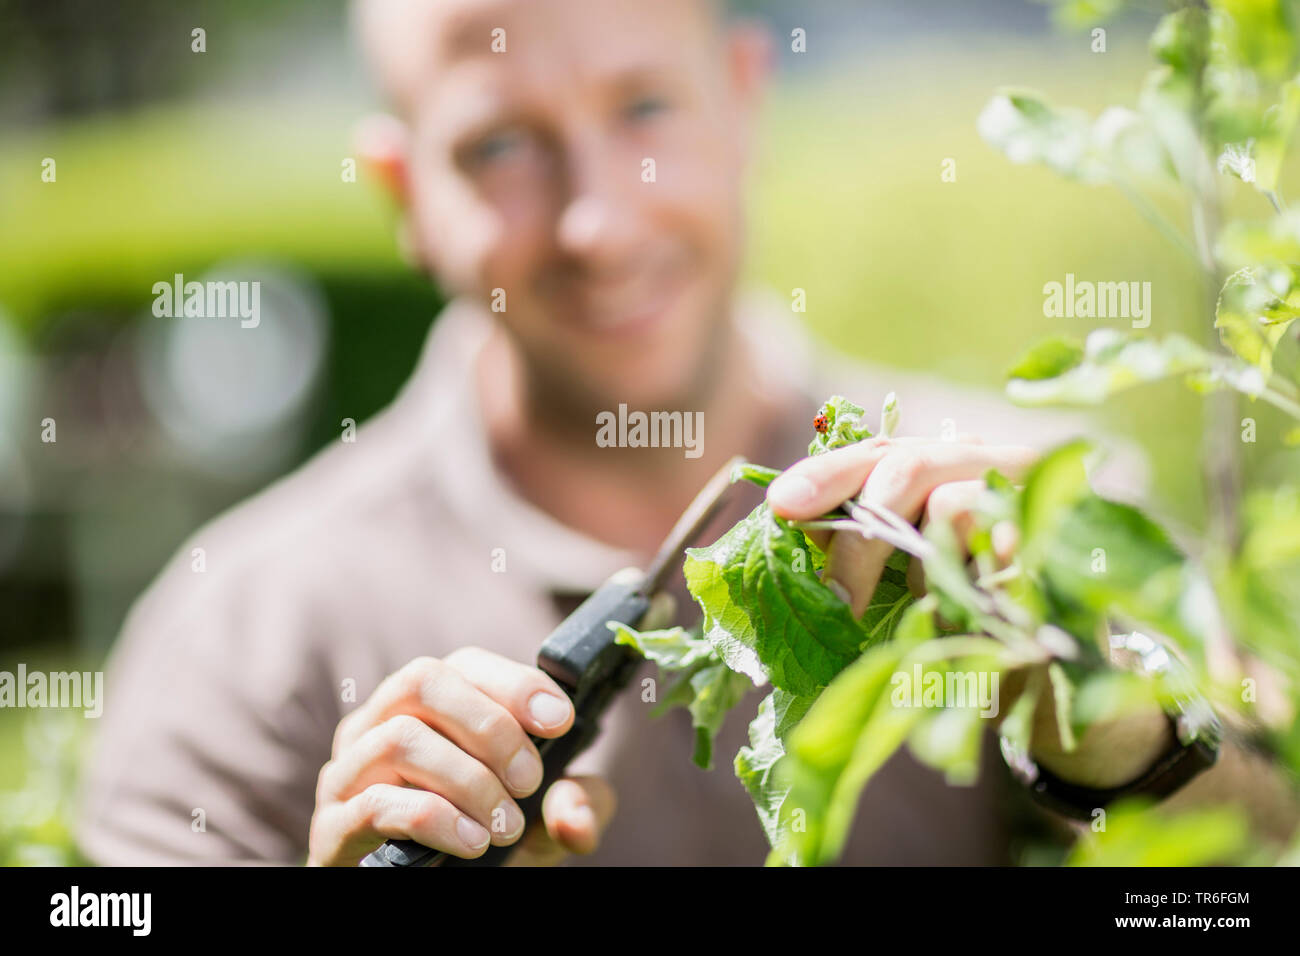 man discovering a ladybug during garden work, Germany Stock Photo